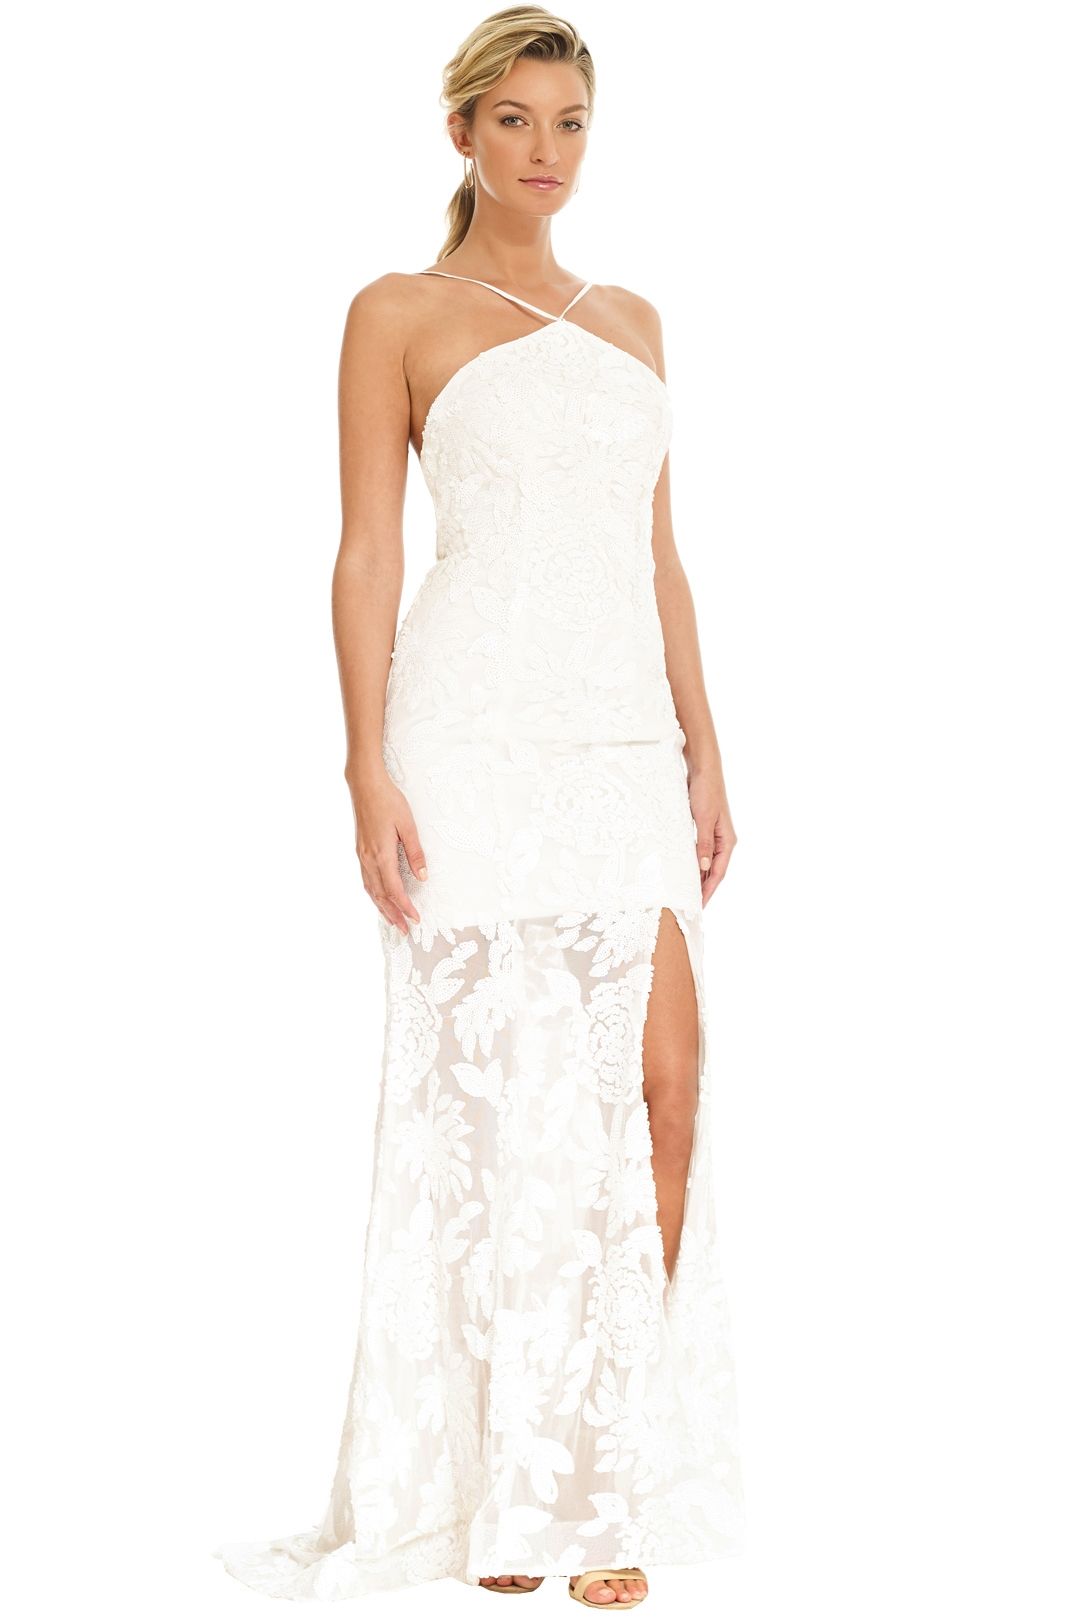 Tinaholy - White Halter Gown - Side